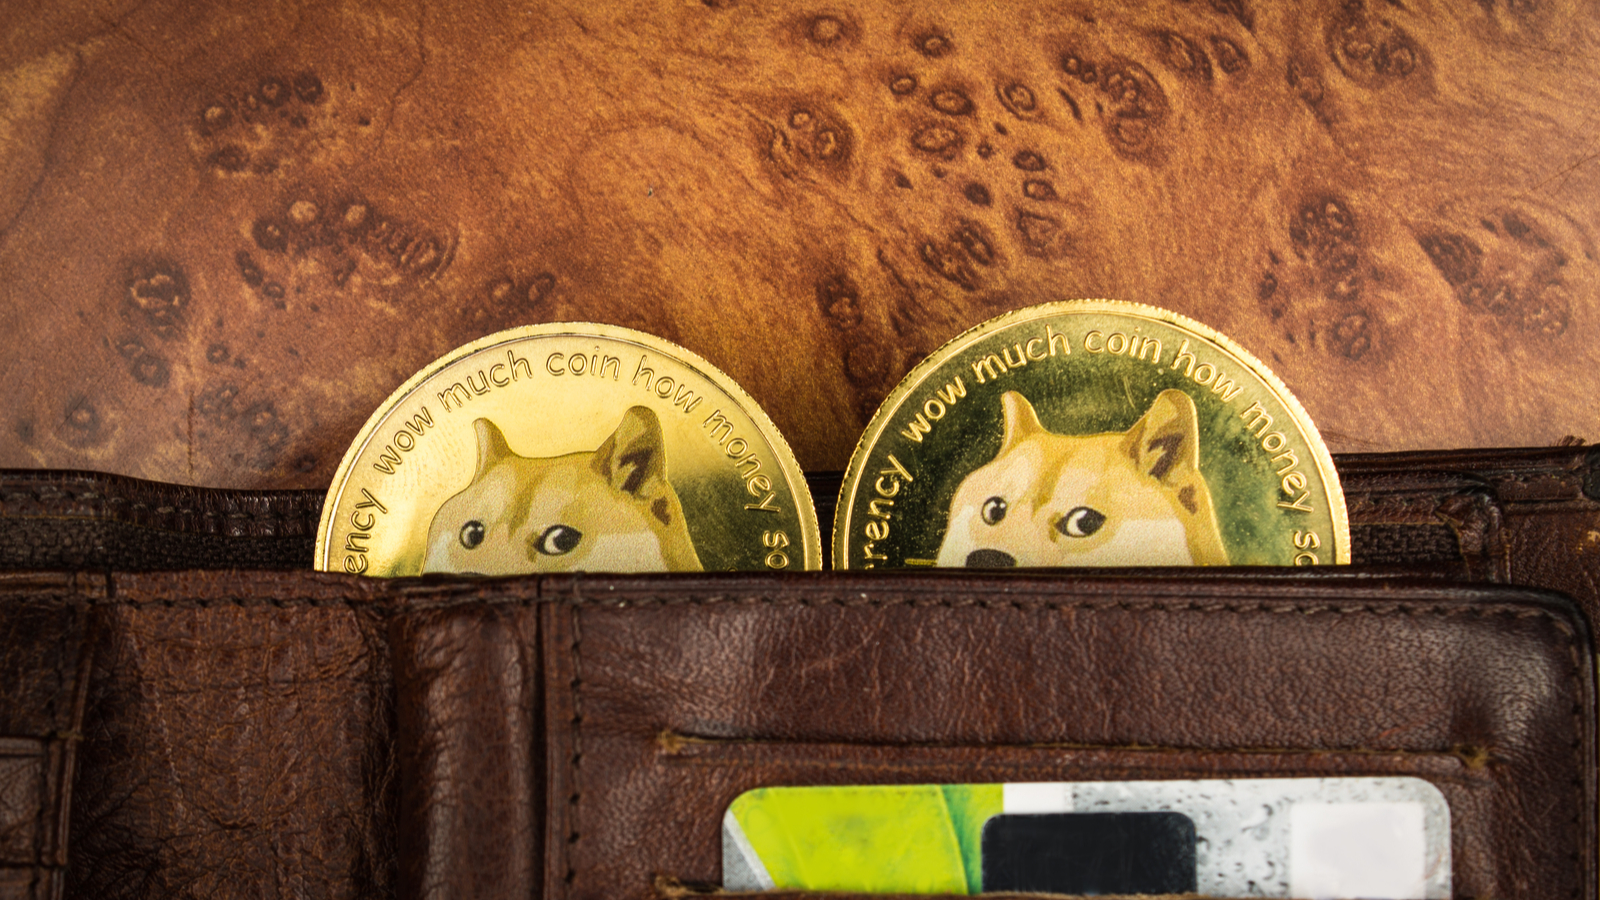 Dogecoin coins with doge faces peeking out of brown leather wallet. The coins have the words "wow much coin how money" embossed on them.